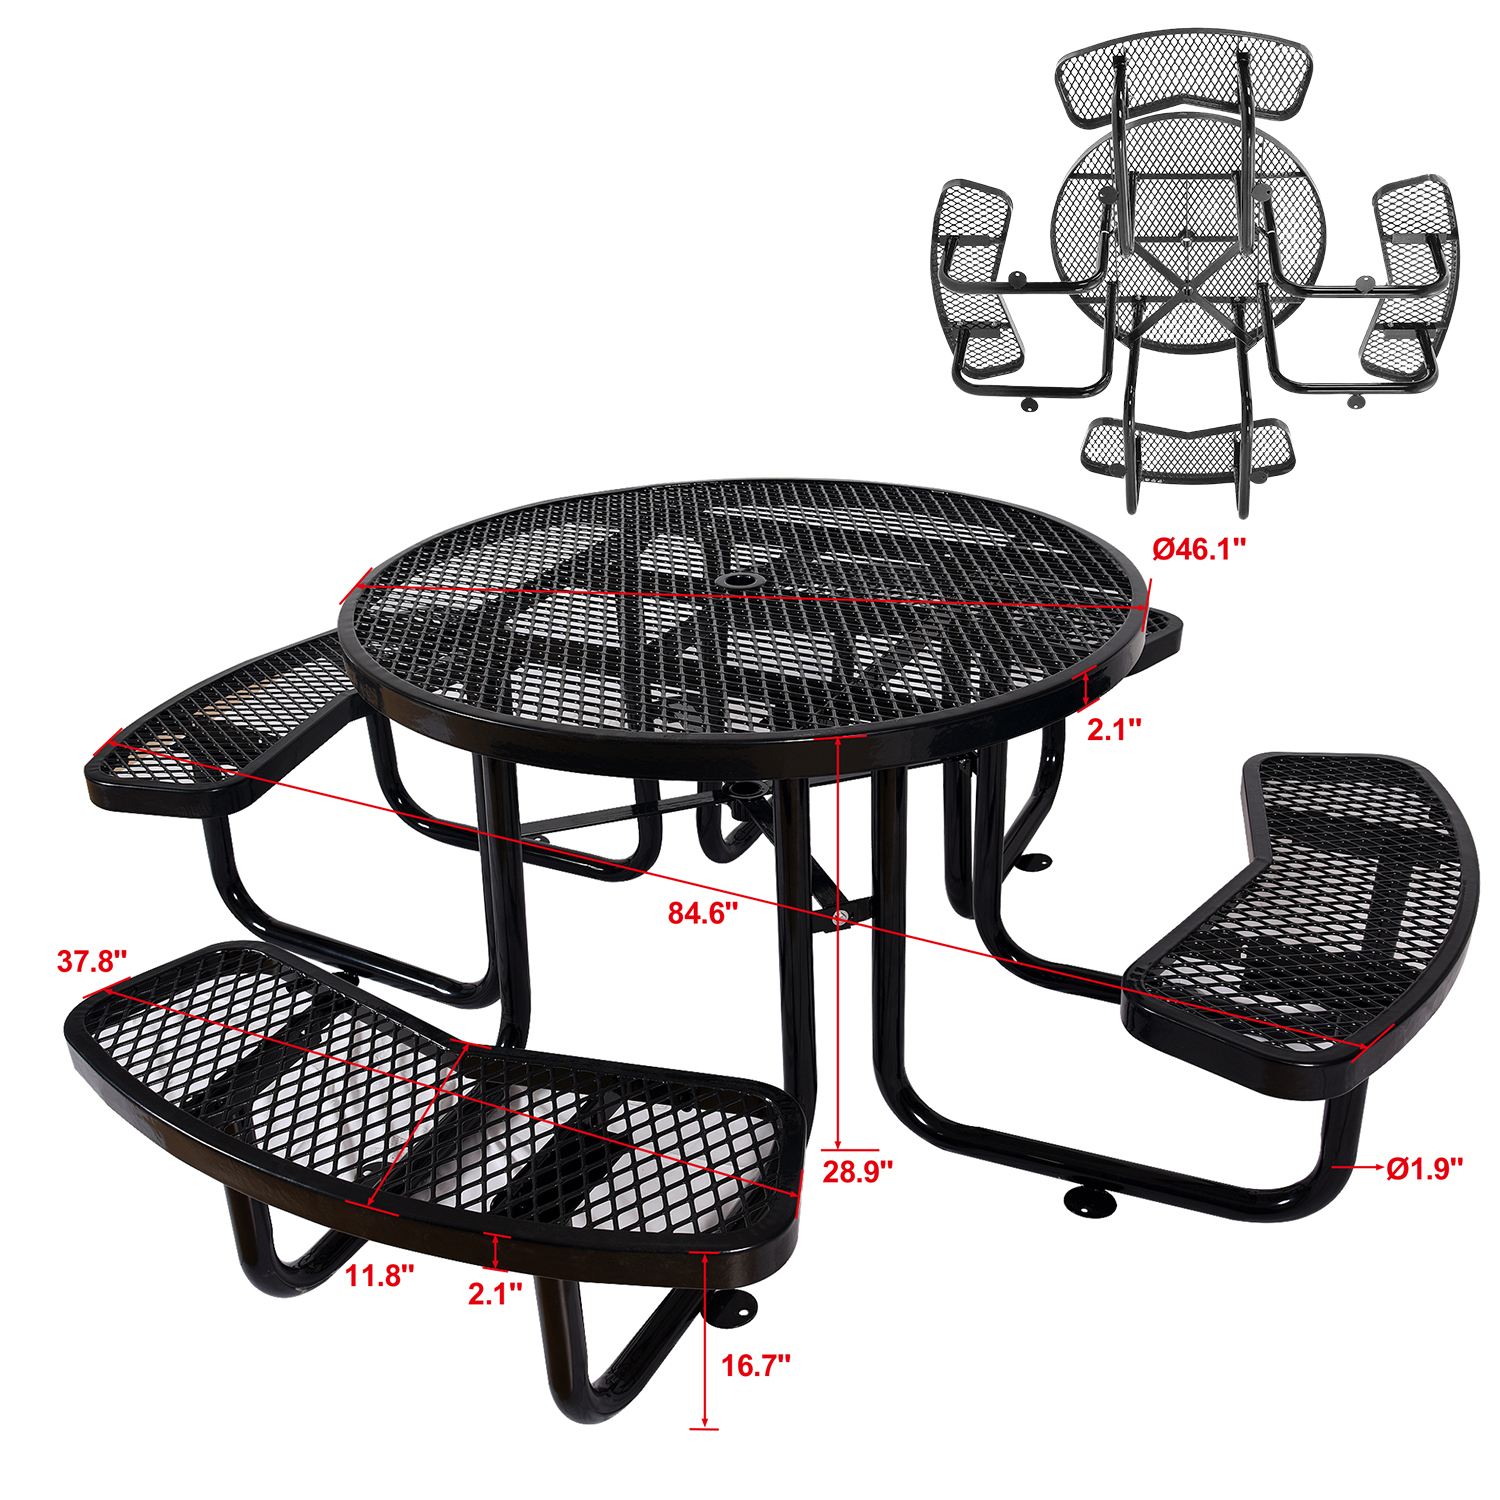 46" Steel Round Picnic Table, Expanded, Industrial Metal Outdoor Table Large Camping Picnic Tables for Backyard Poolside Dining Party Garden Patio Lawn Deck (Black) - image 4 of 7